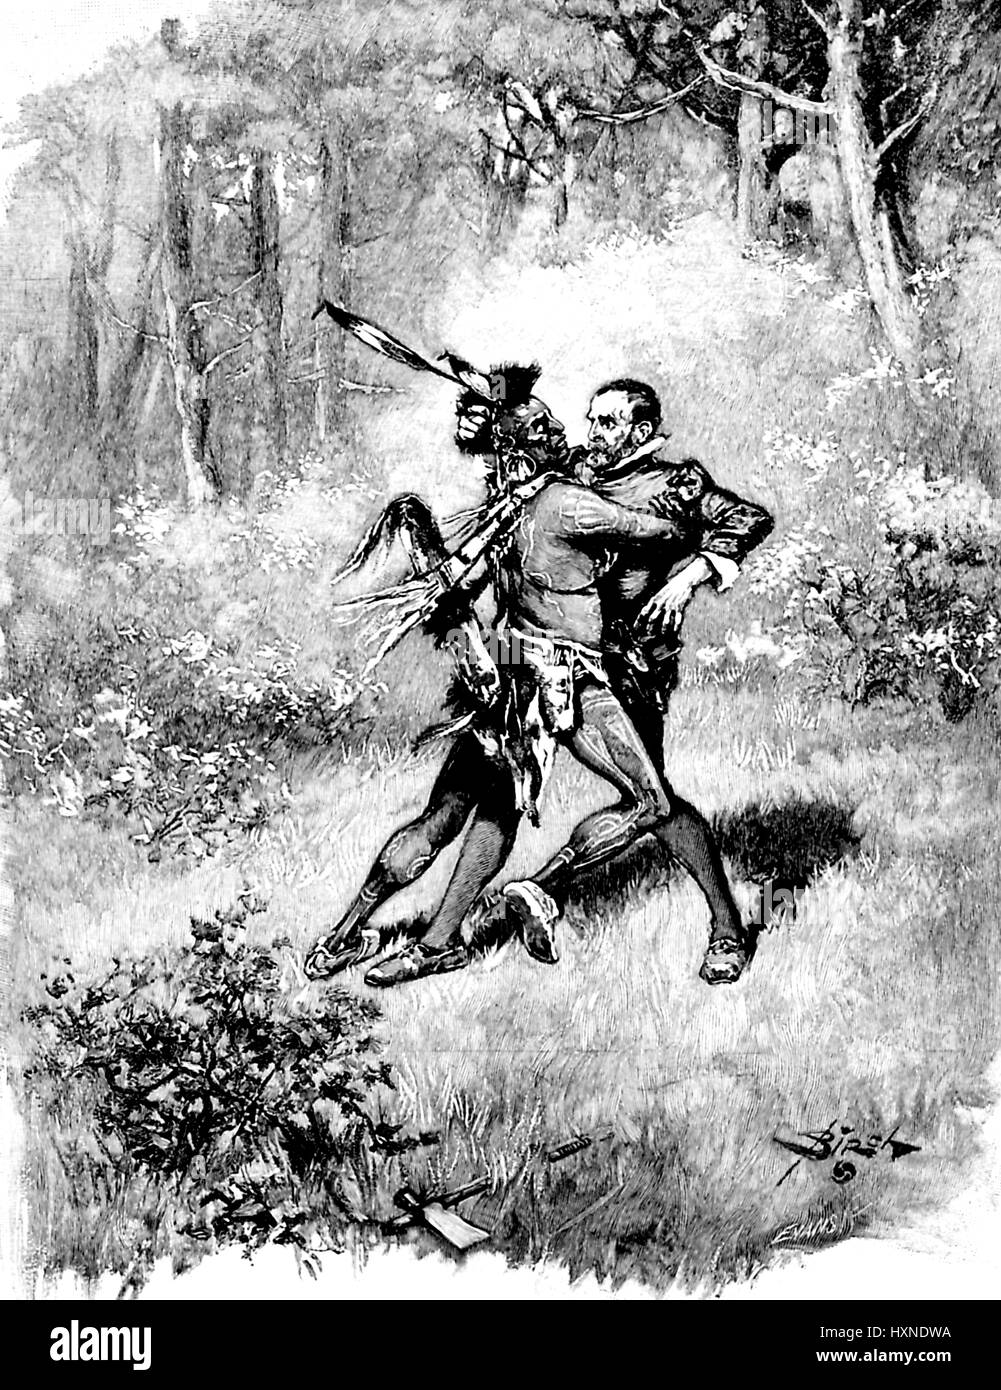 Illustration of a Native American man with a feather headdress and traditional dress attacking a surprised colonial American settler in a wooded area, originally titled The Native and the Immigrant, 1896. Stock Photo